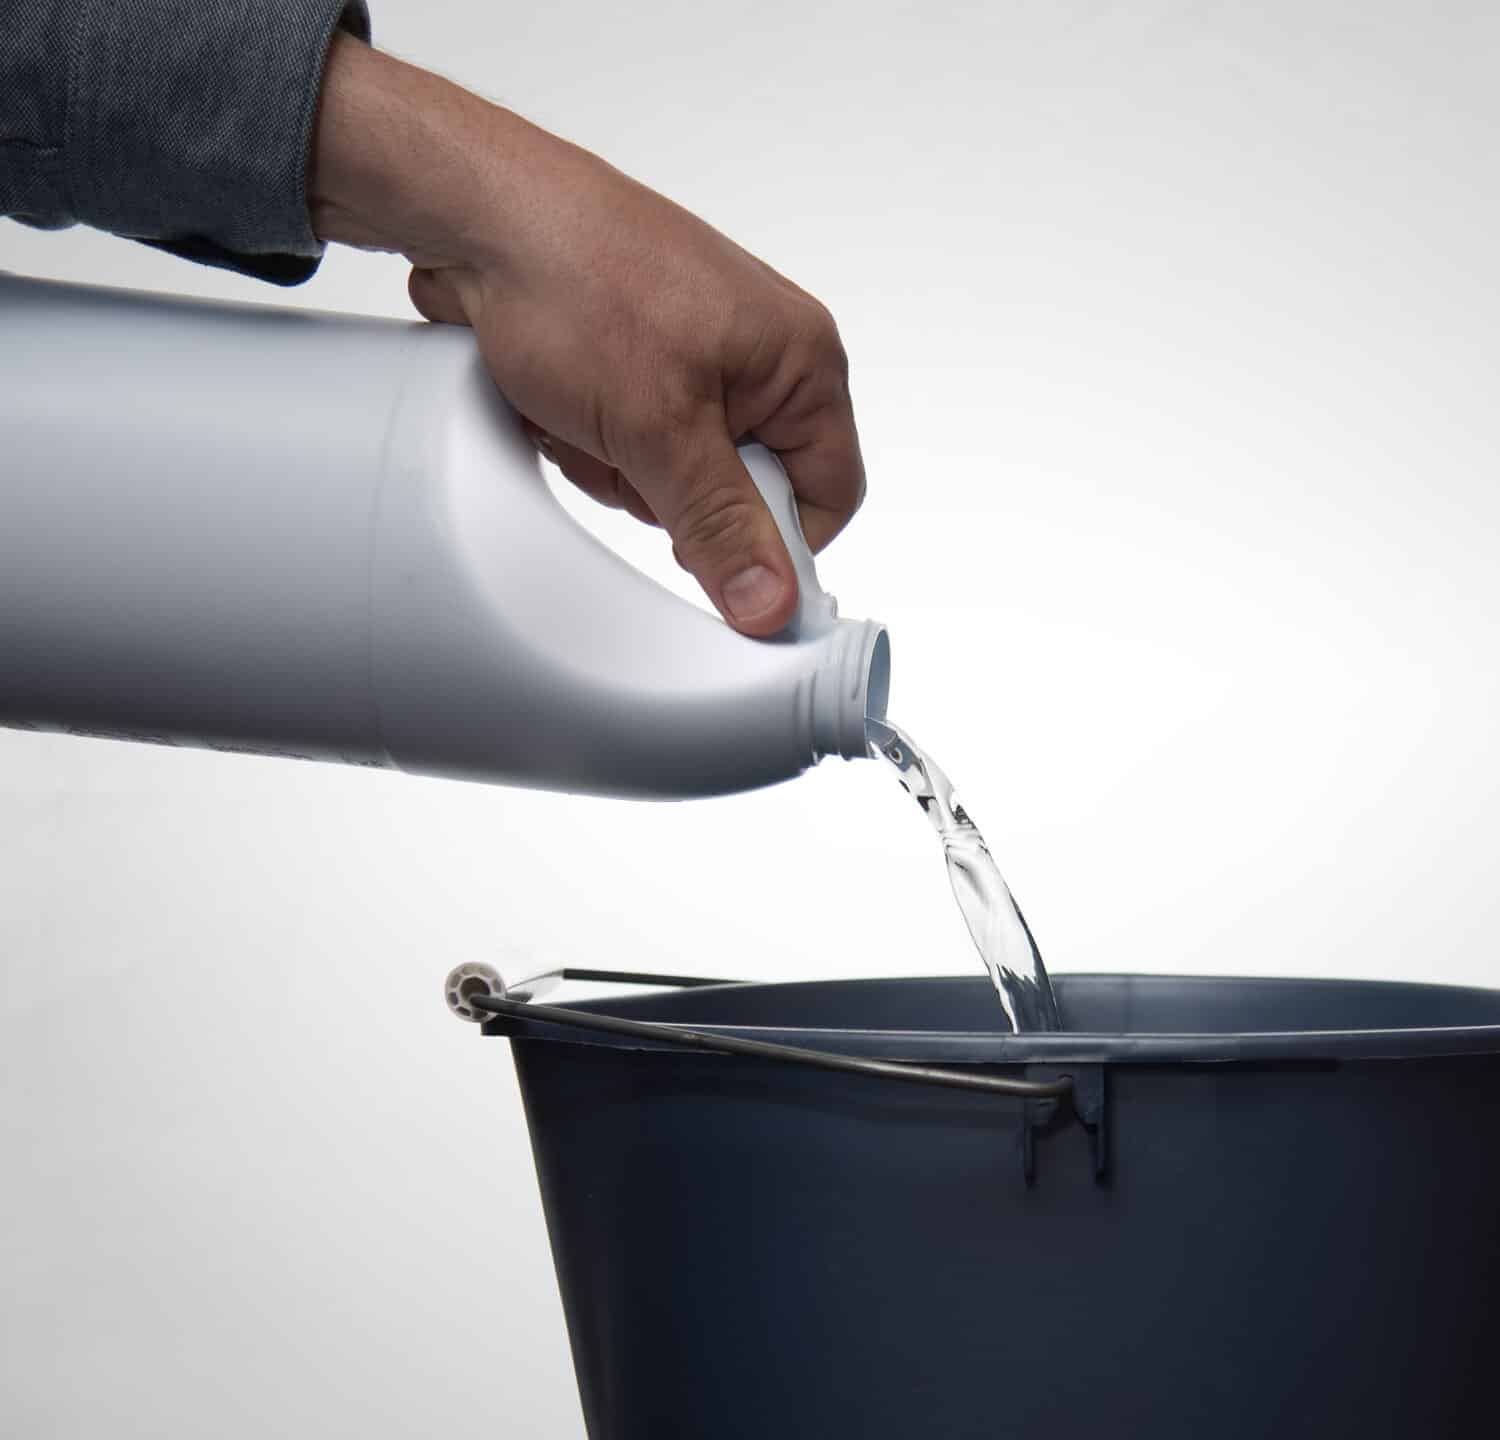 Bleach into a blue bucket against a white background.